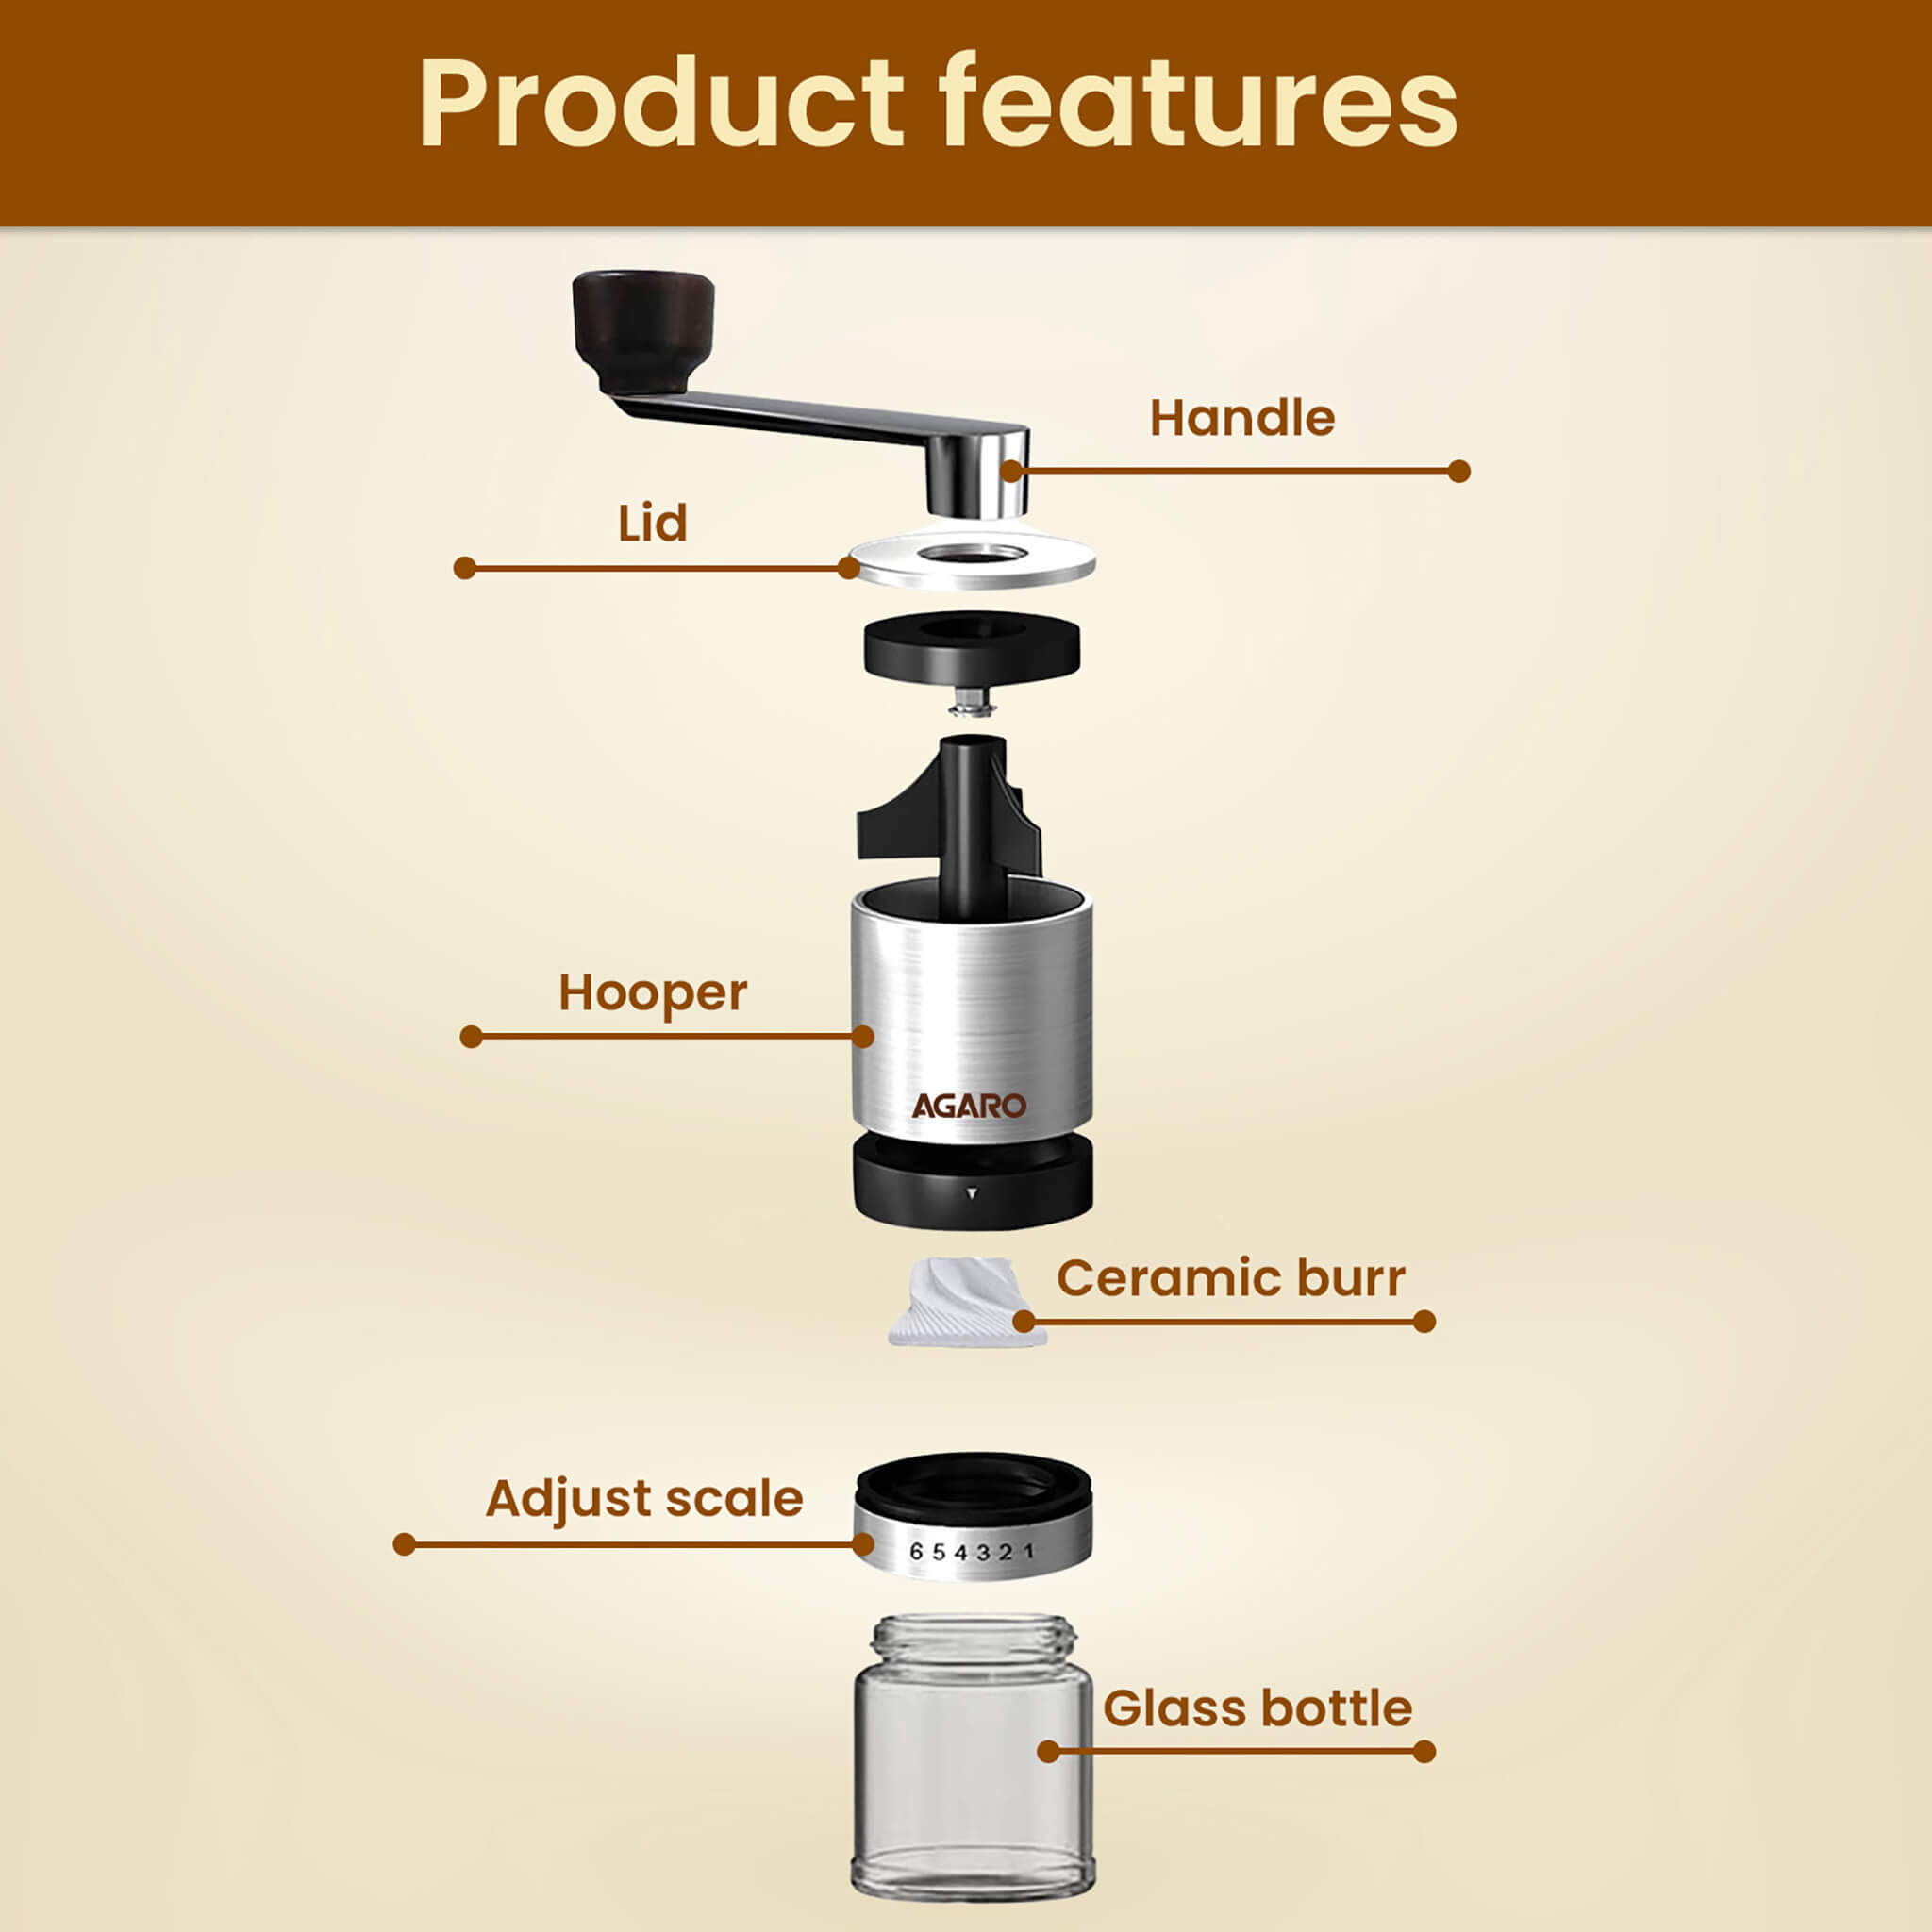 AGARO Elite Manual Coffee Grinder, Ceramic Grinder with Glass jar, 6  Adjustable Settings, Stainless Steel Body, Tooth Handle, No Power, Whole  Bean